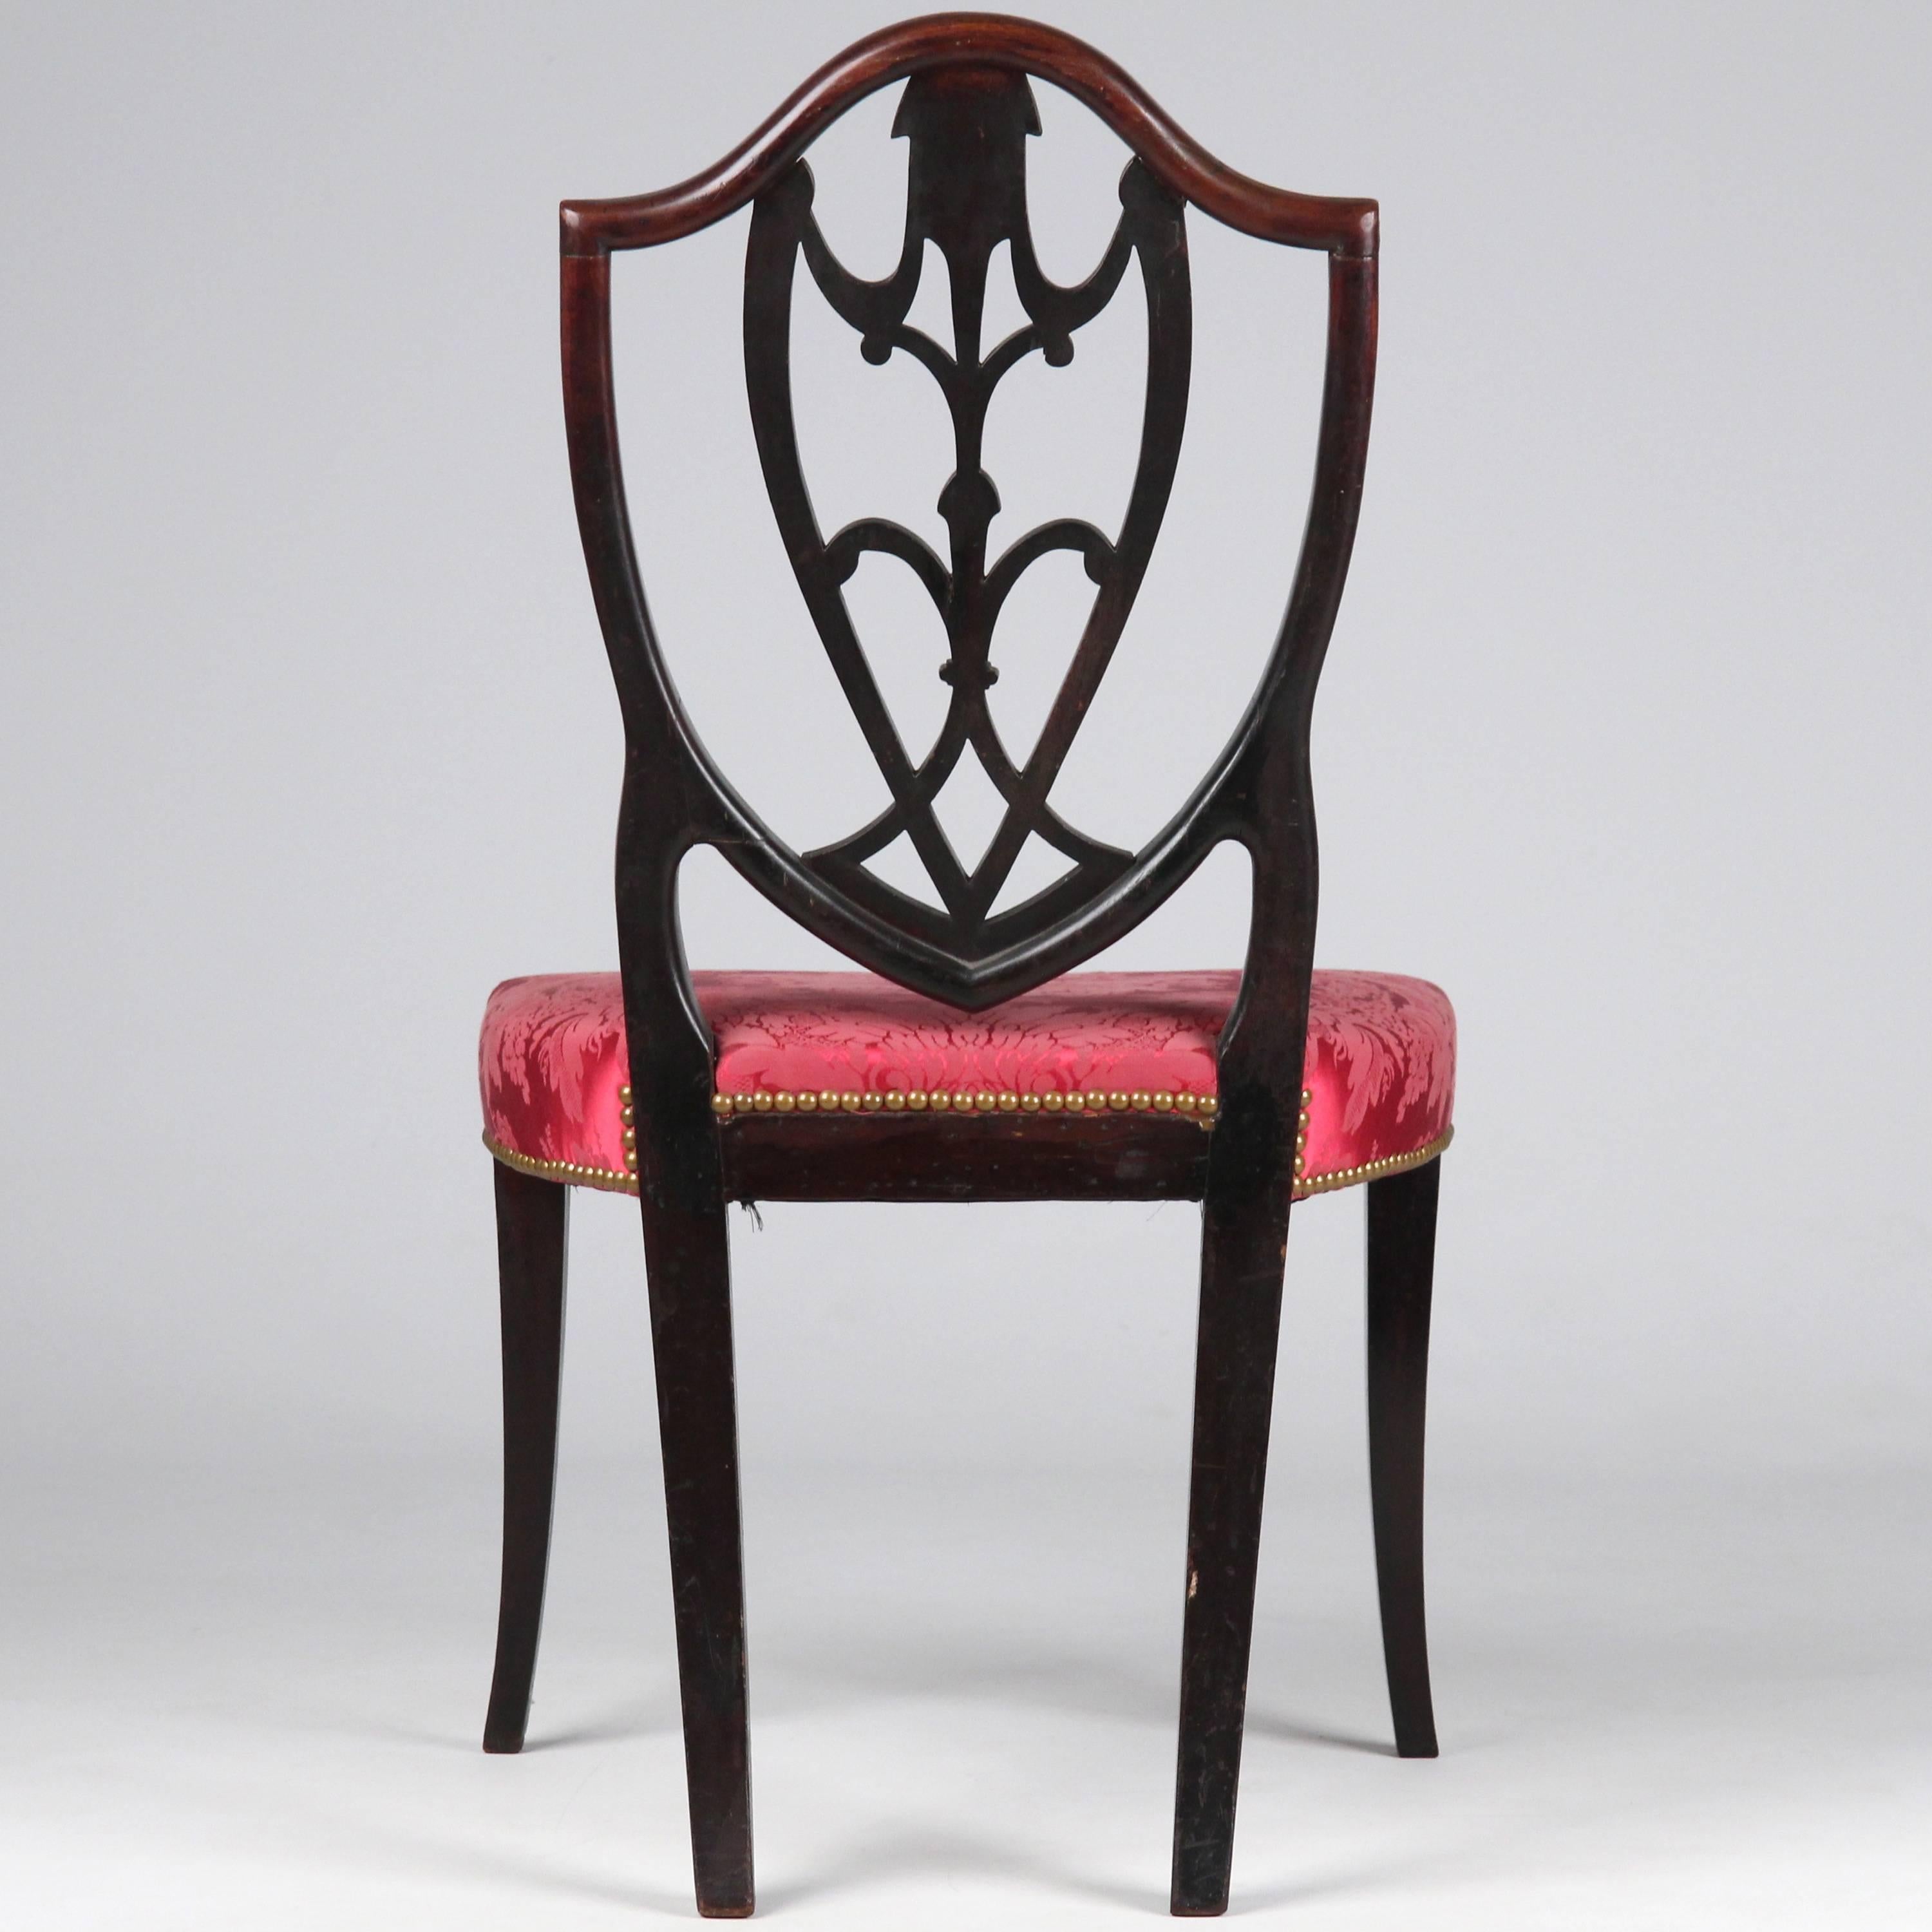 Exhibiting the finest lines and perfect sense of proportion to be found in any form of the period, this rare and incredibly beautiful chair is a work of art in it's purest expression. Flawless balance of proportions is clearly calculated in each